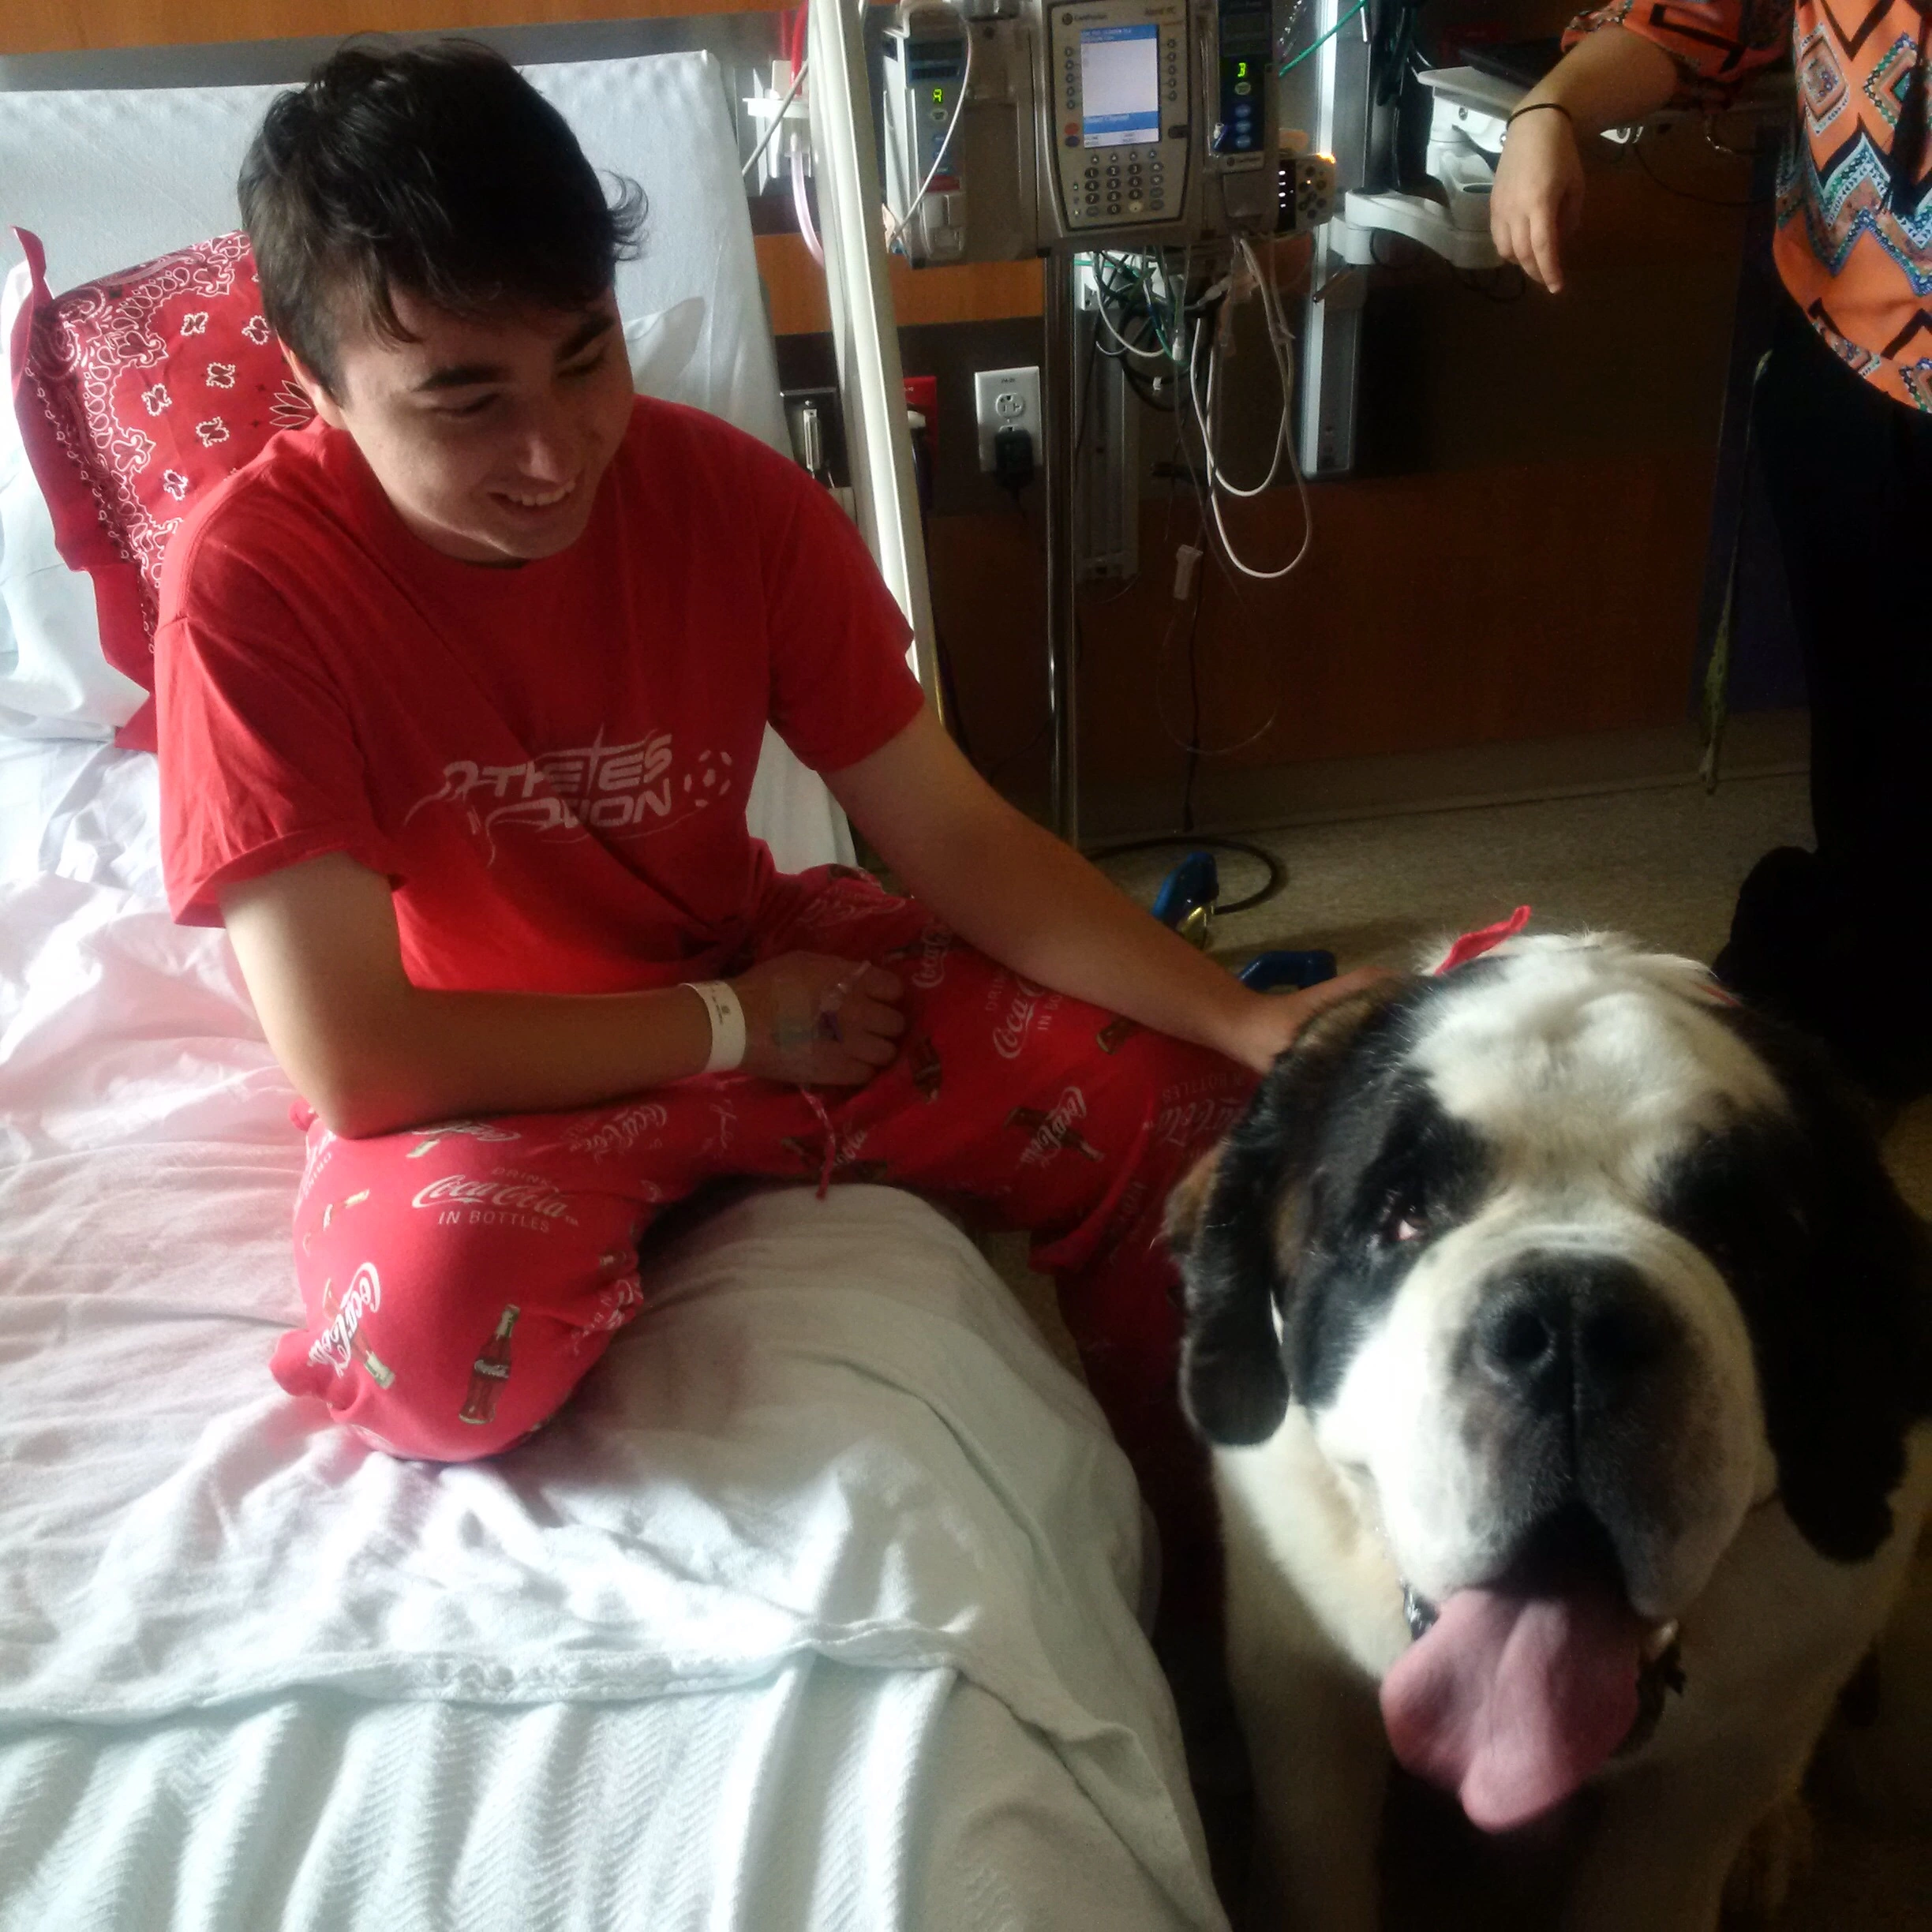 Daniel is visited by one of the therapy dogs at McLane Children's